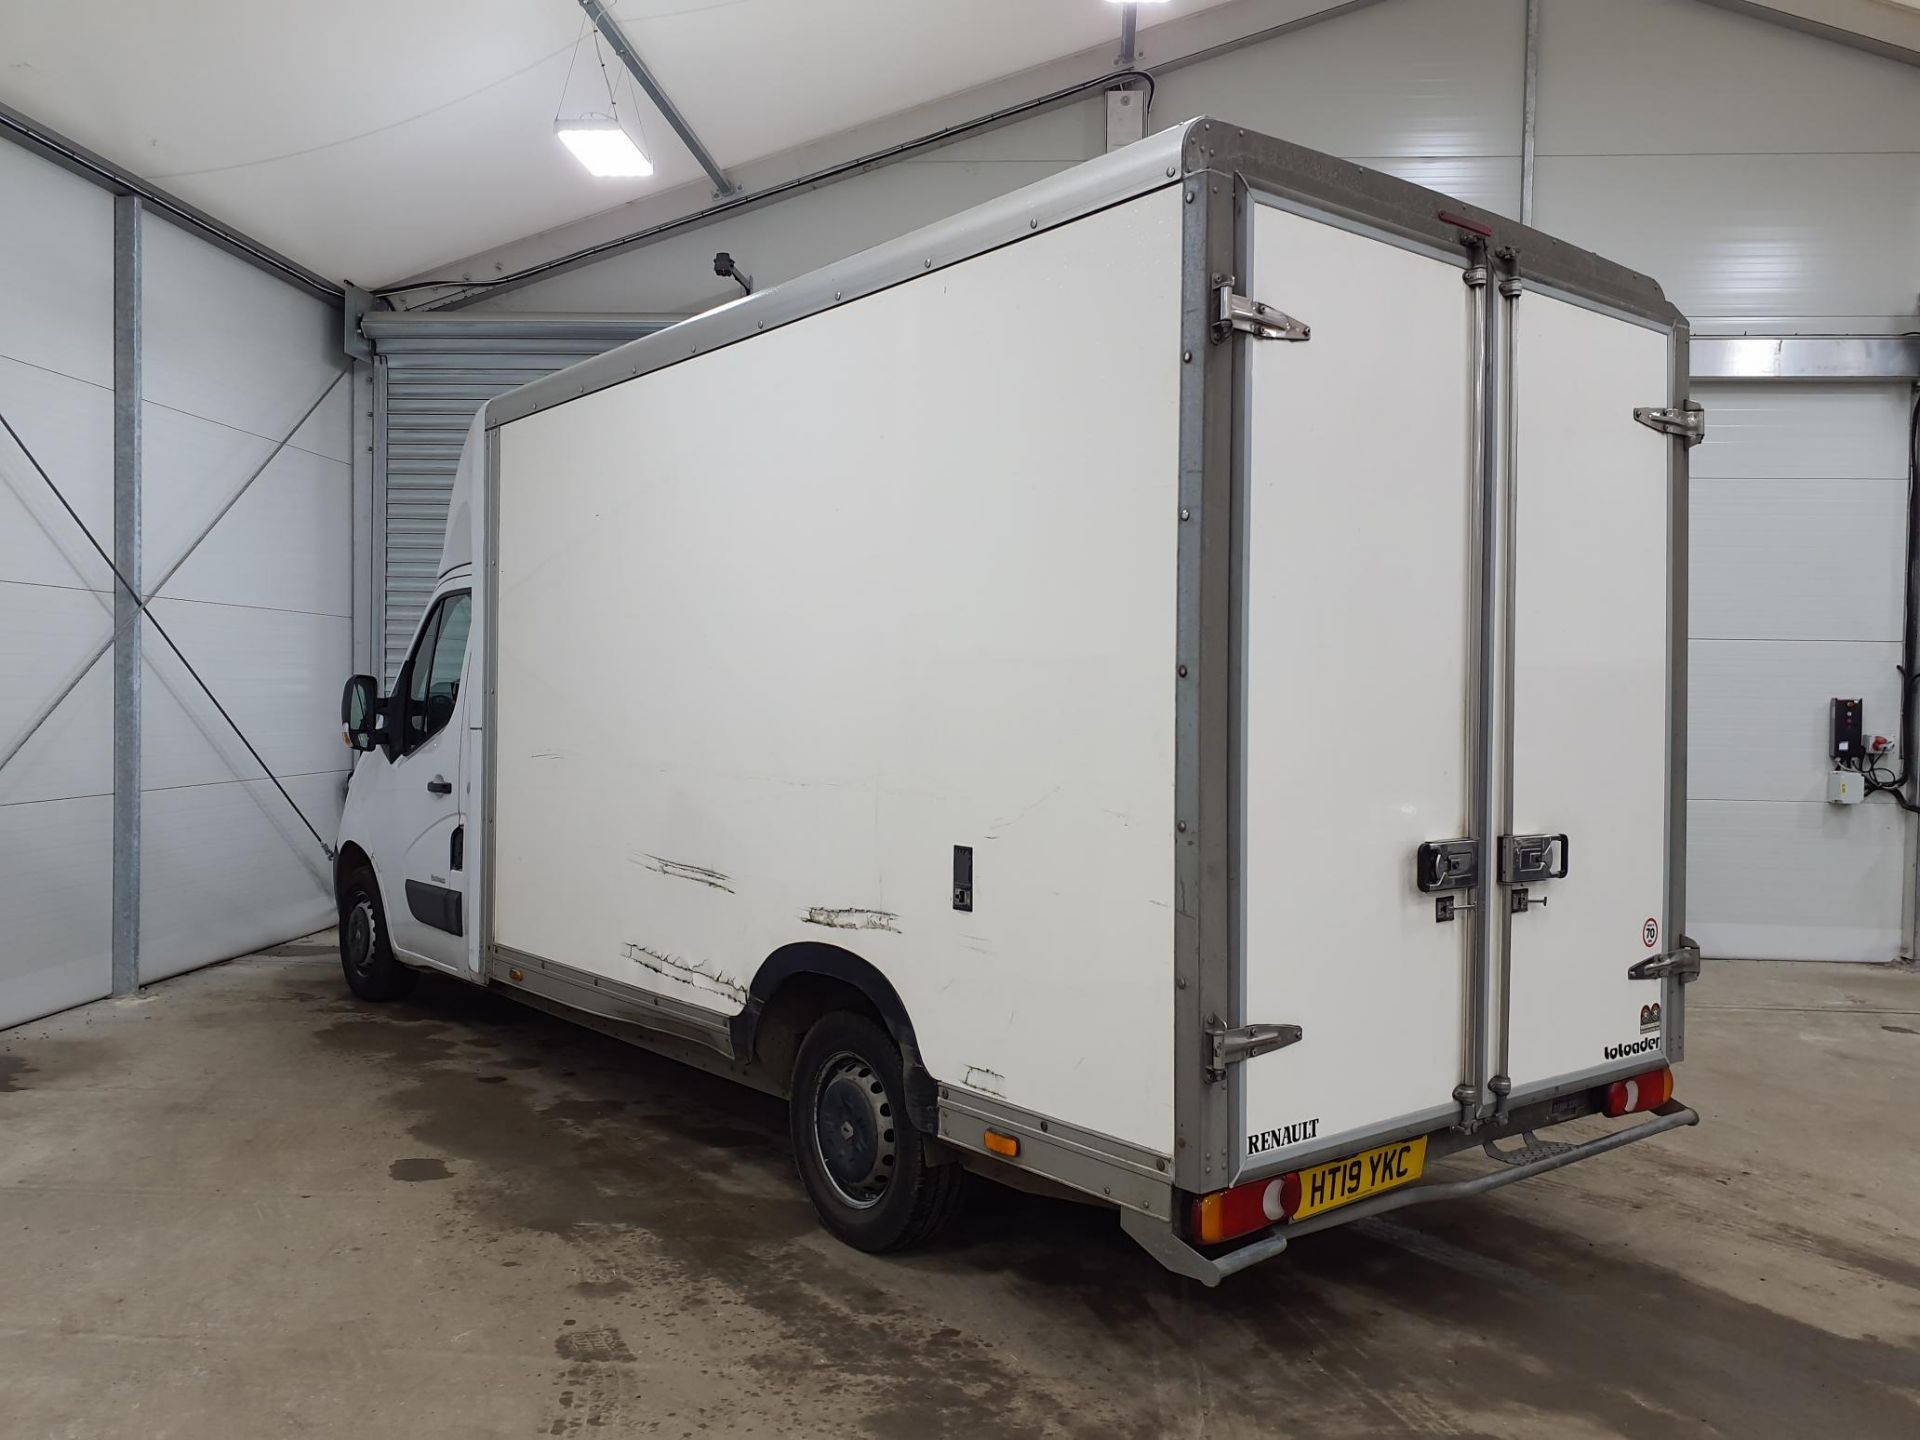 (ON SALE) RENAULT MASTER LL35 *LWB - LOW LOADER / LUTON BOX* (2019 - EURO 6) 2.3 DCI - (1 OWNER) - Image 3 of 6